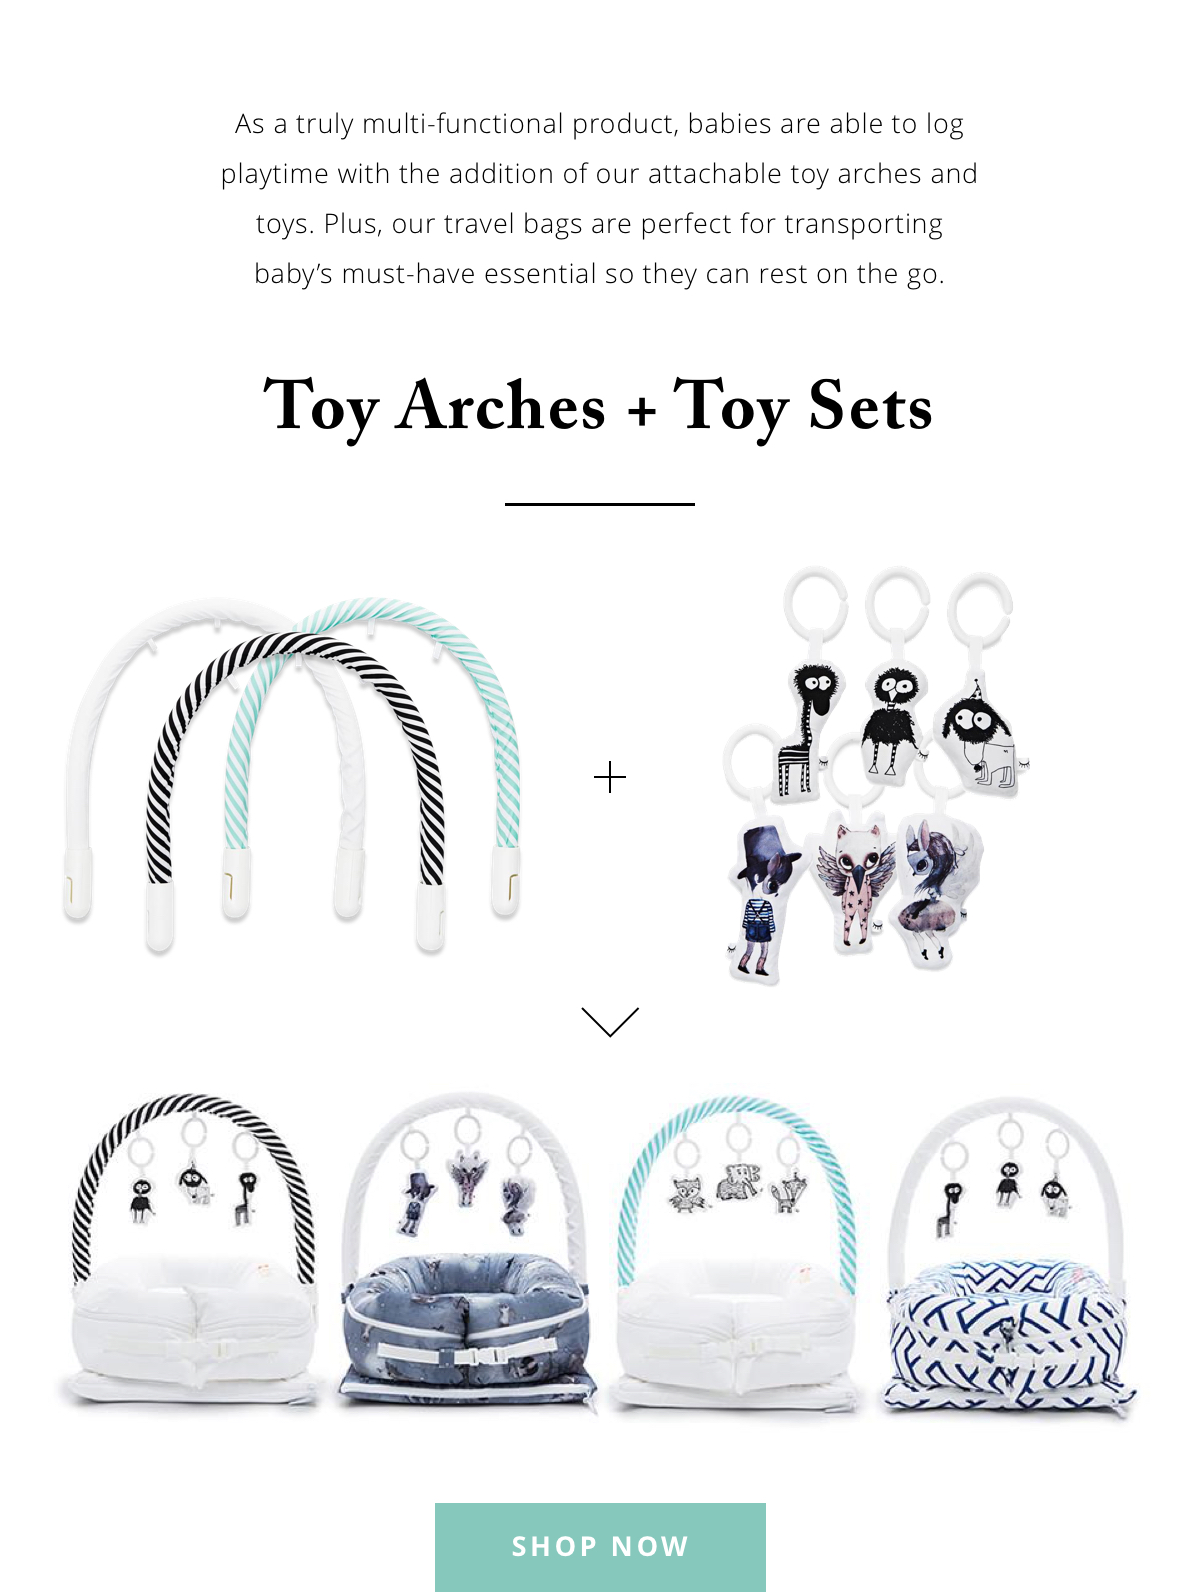 Toy Arch and Toy Sets